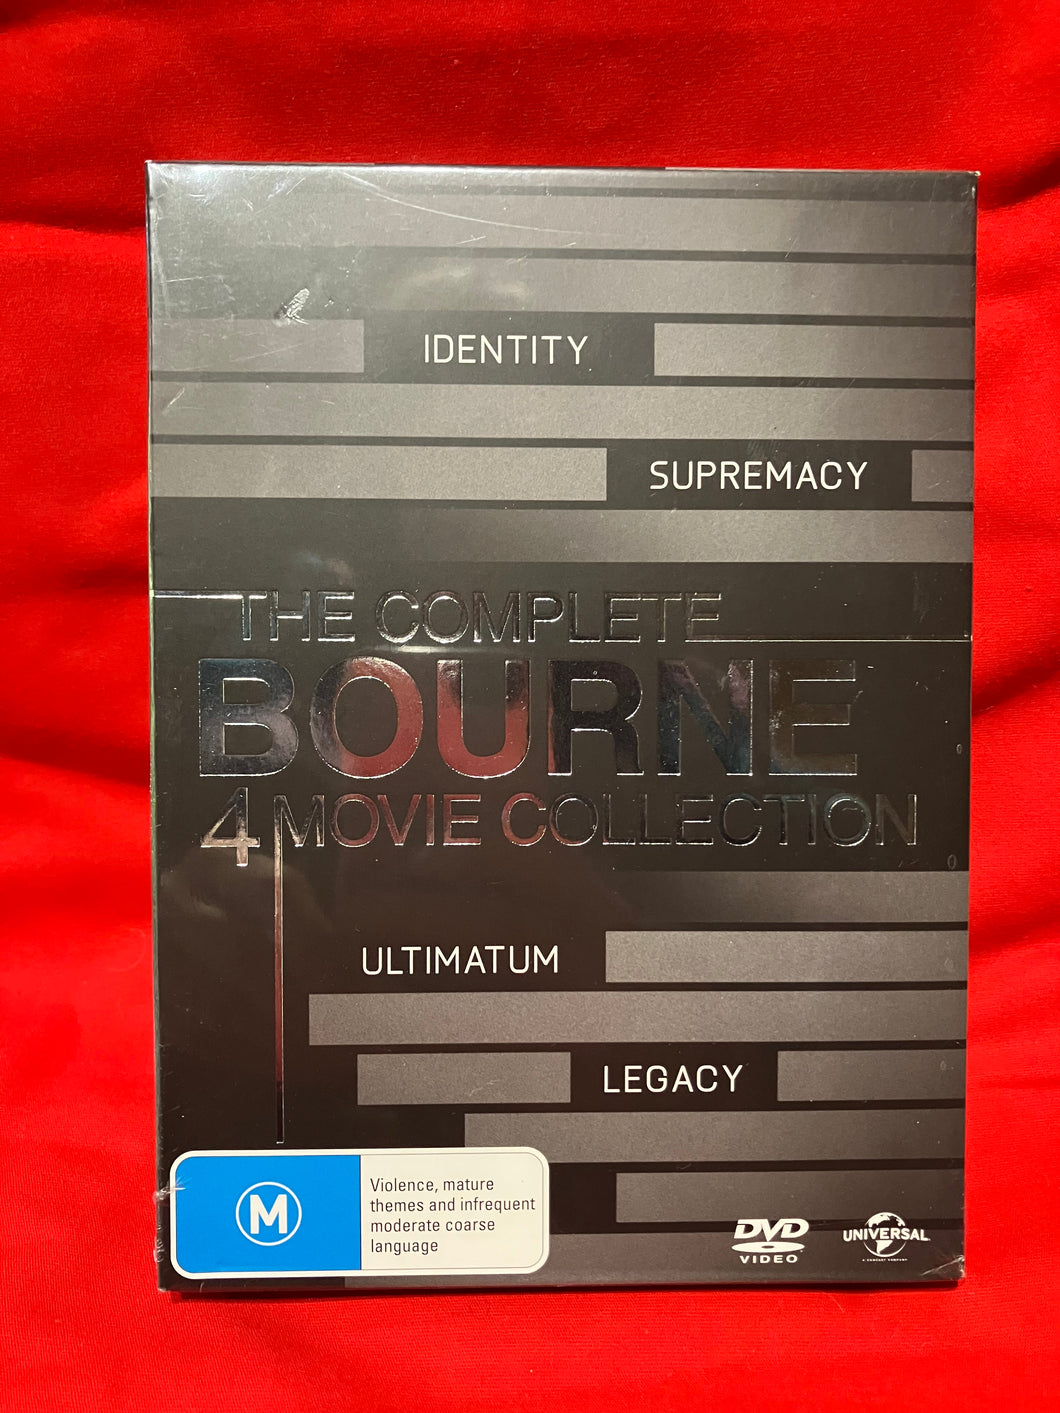 THE COMPLETE BOURNE 4 MOVIE COLLECTION - DVD (SEALED)